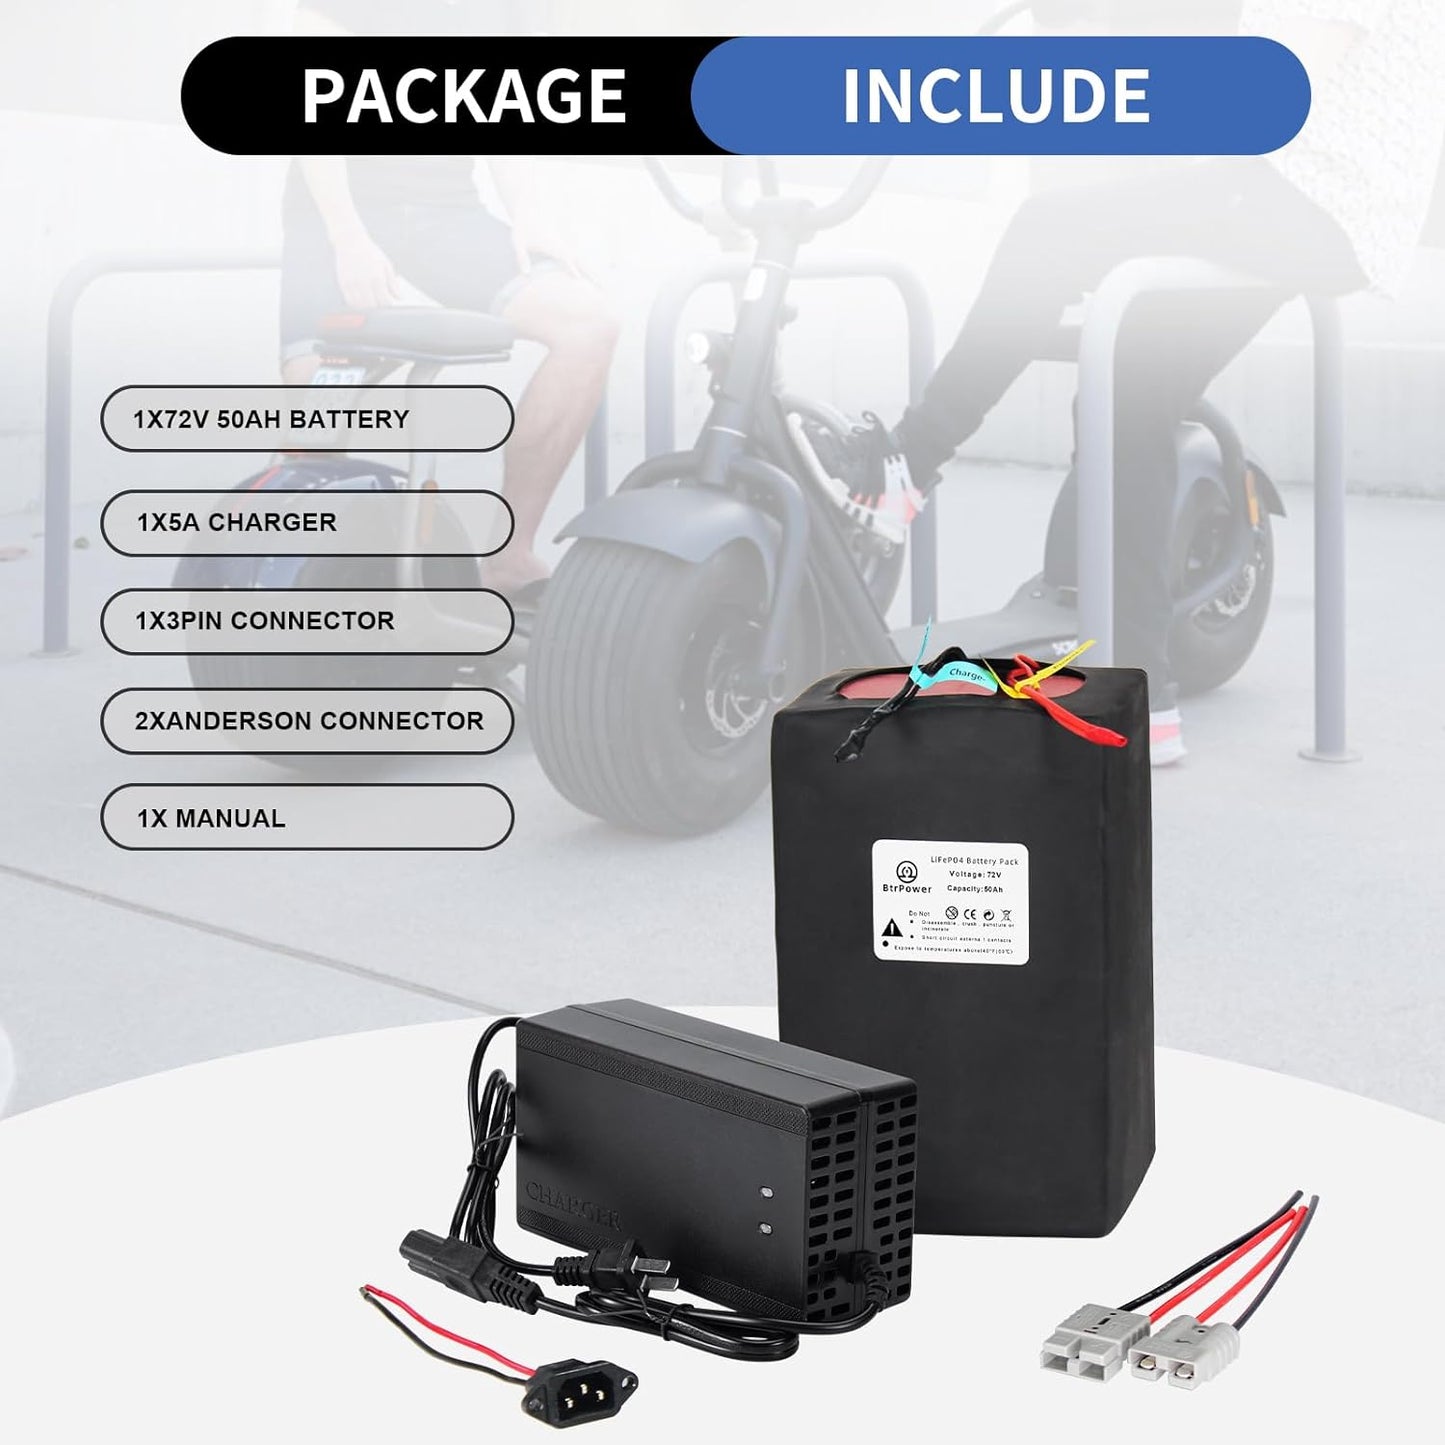 BtrPower Ebike Battery 72V 50AH Lithium LiFePO4 Battery Pack with 50A BMS,5A Charger